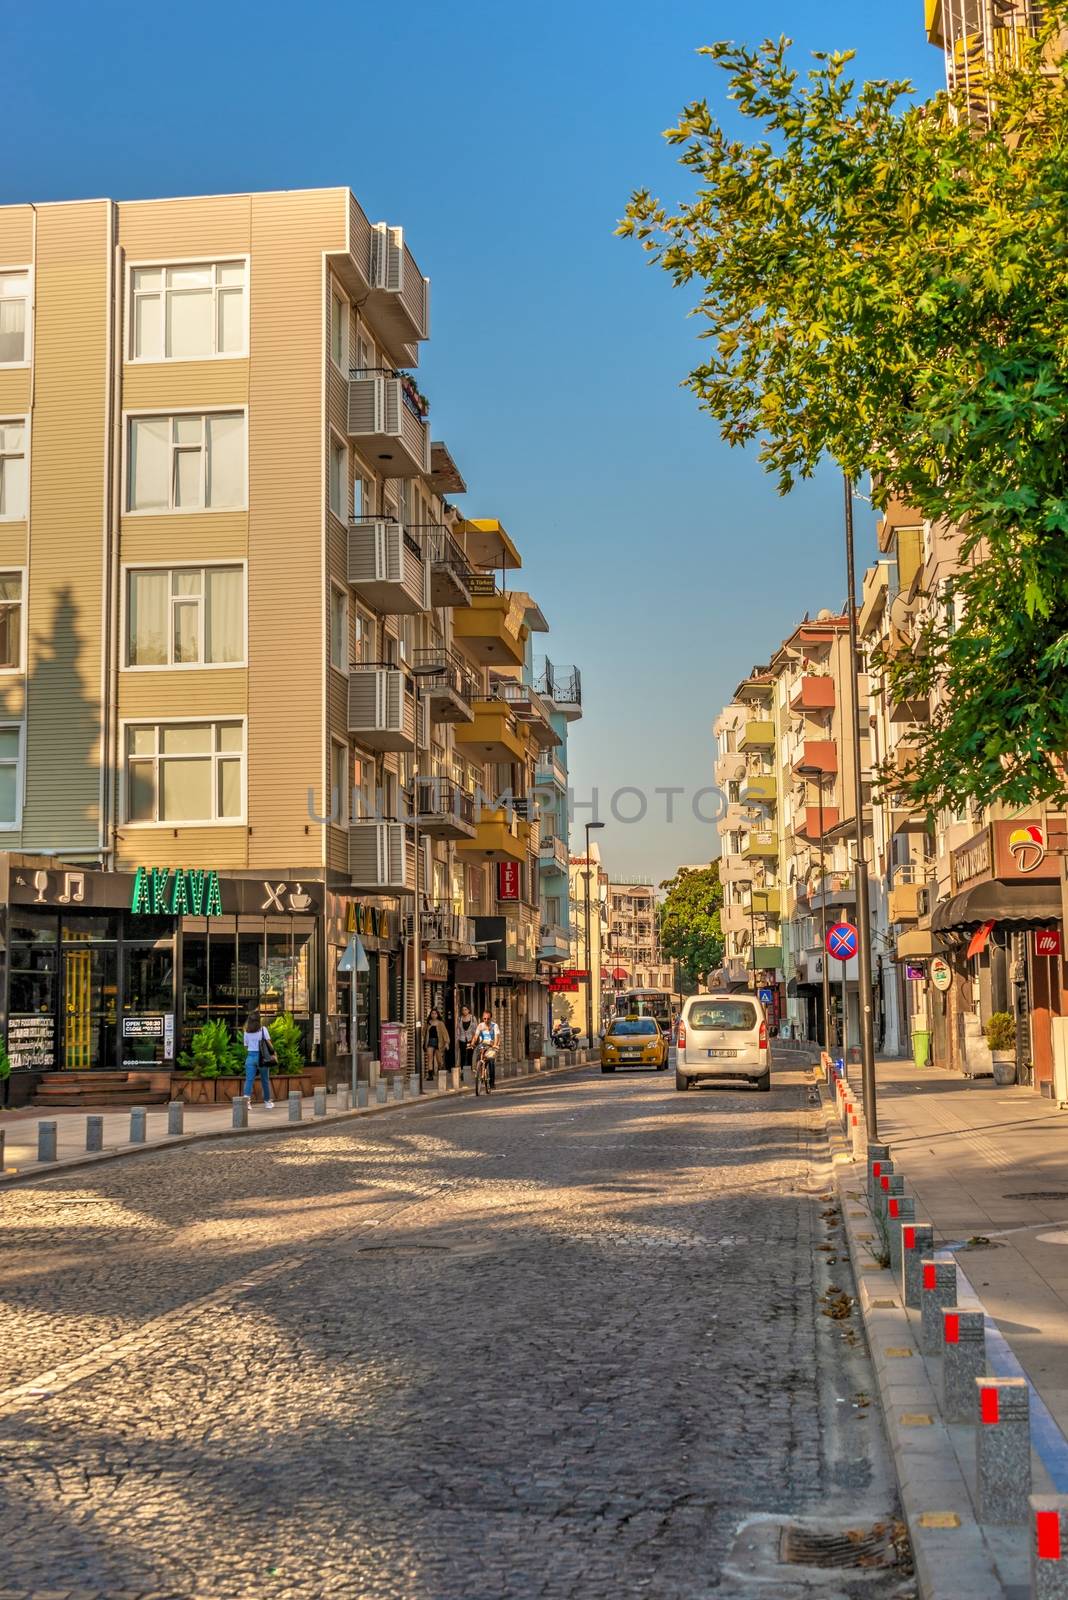 Canakkale, Turkey - 07.23.2019.  Streets of the Canakkale city in Turkey on a sunny summer morning.